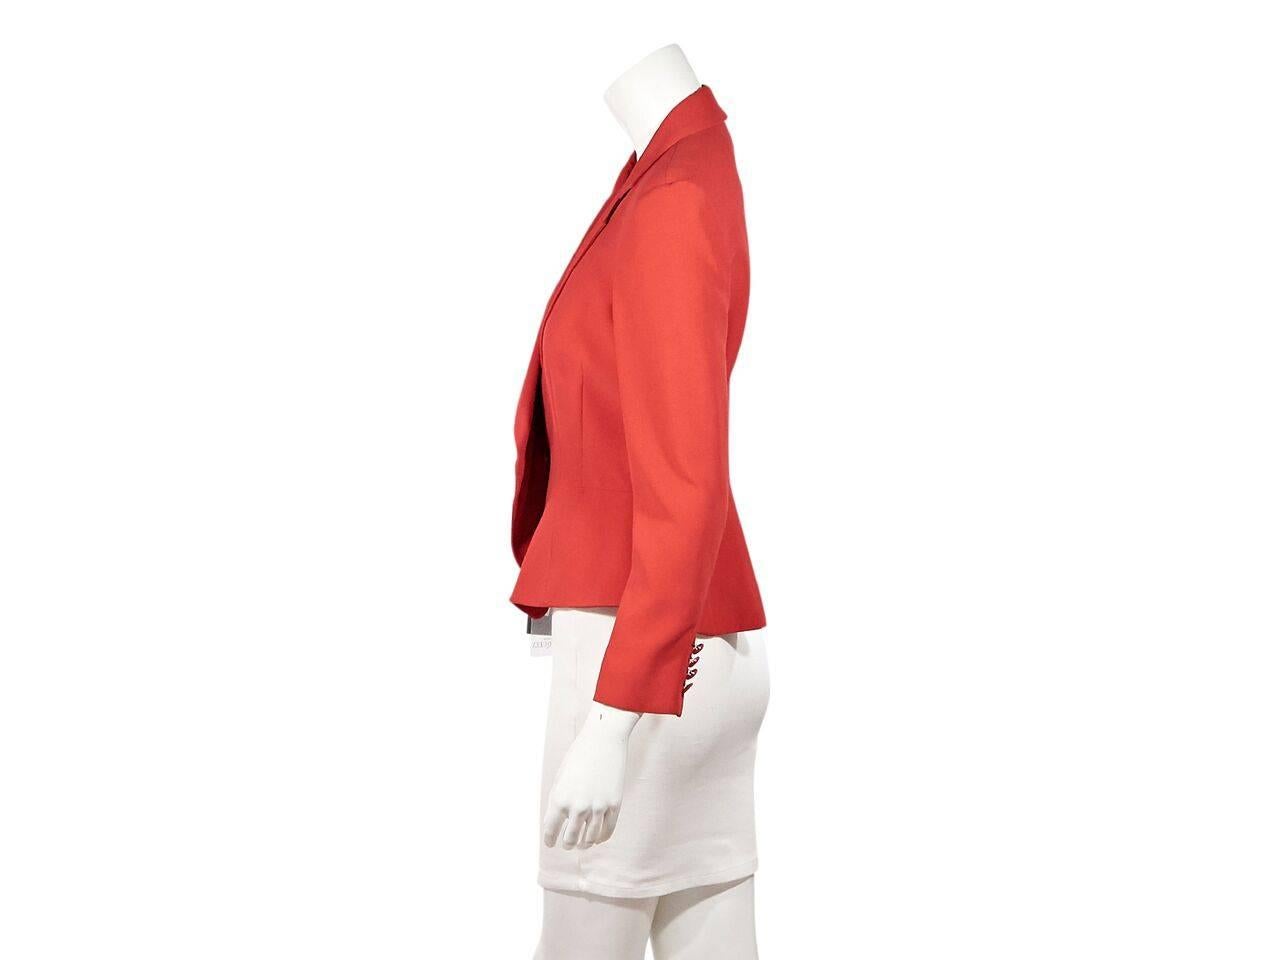 Product details:  Red peplum waist blazer by Alexander McQueen  Notched lapel.  Bracelet-length sleeves.  Four-button detail at cuffs.  Concealed button-front closure.  Label size IT 44. 
Condition: Pre-owned. New with tags.
Est. Retail $ 1,975.00